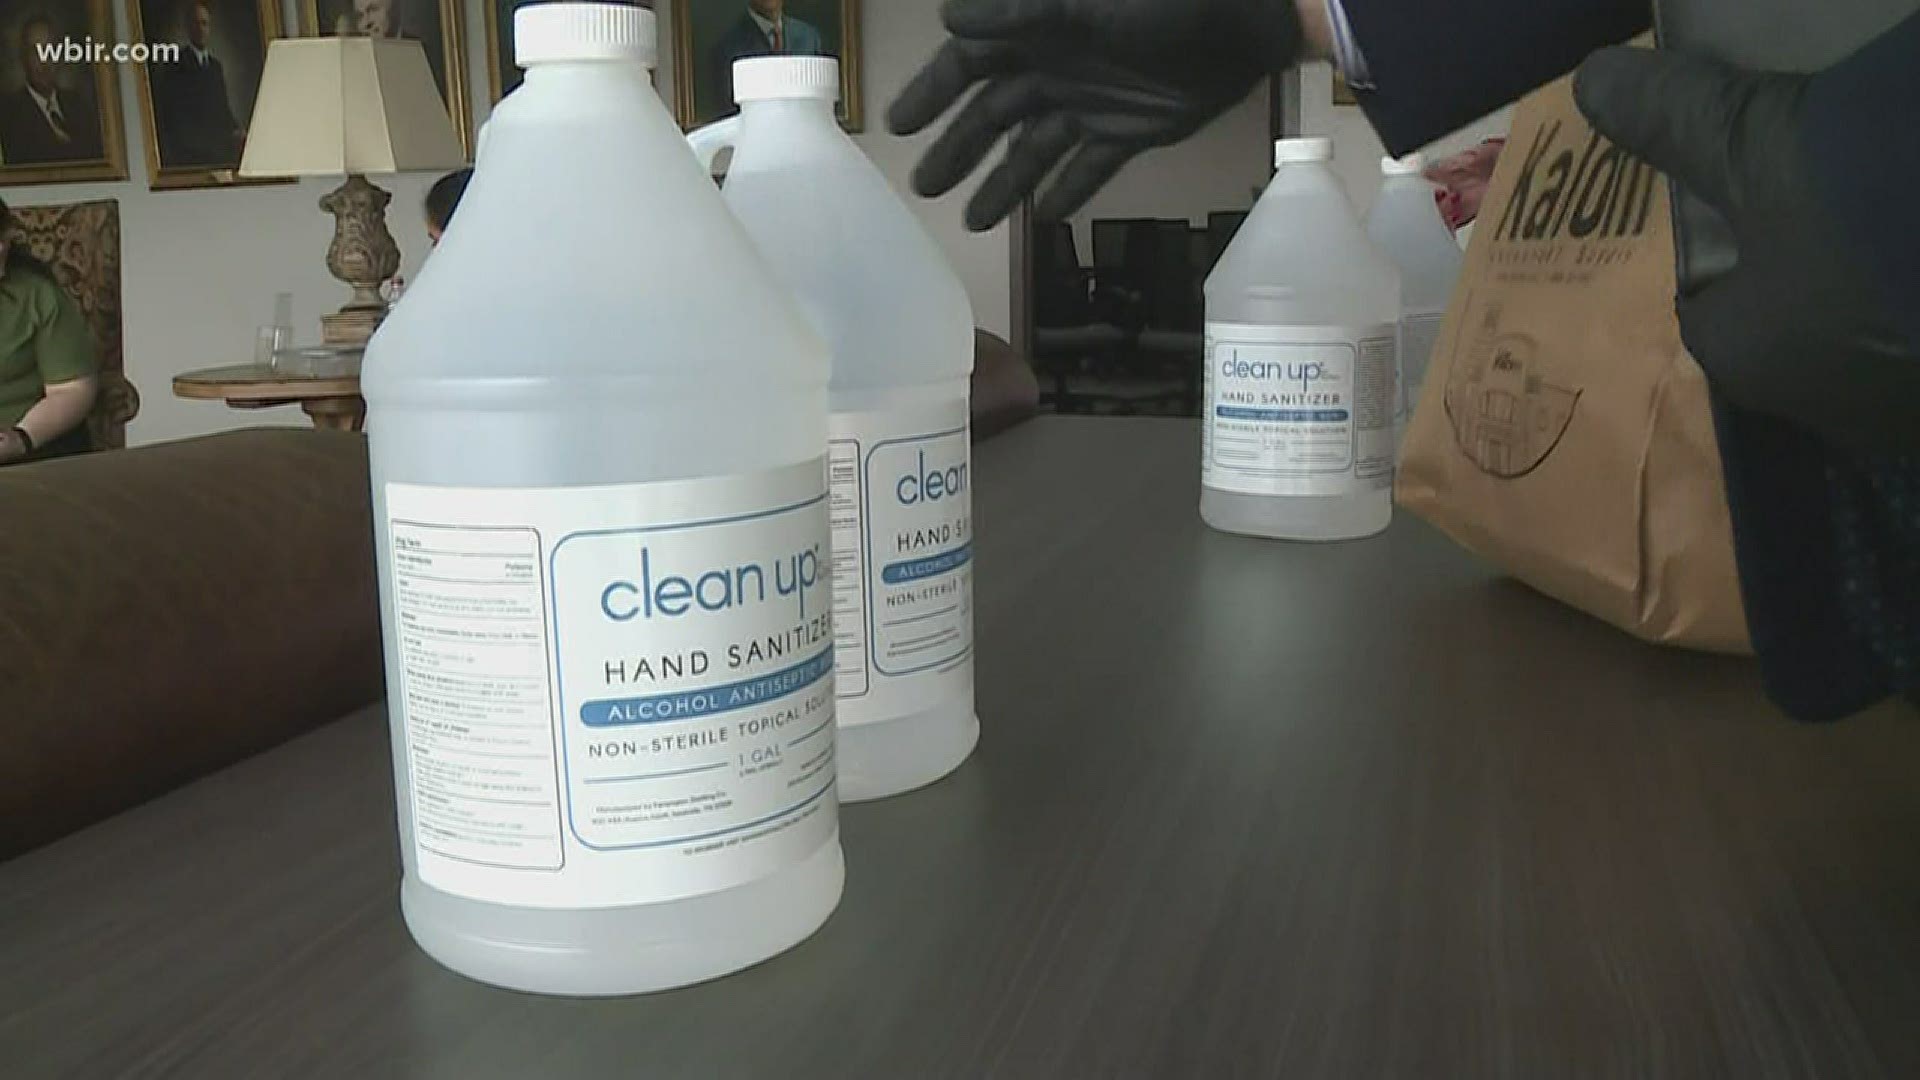 Katom Restaurant Supply Company donated a hundred gallons of hand sanitizer to local first responders today.